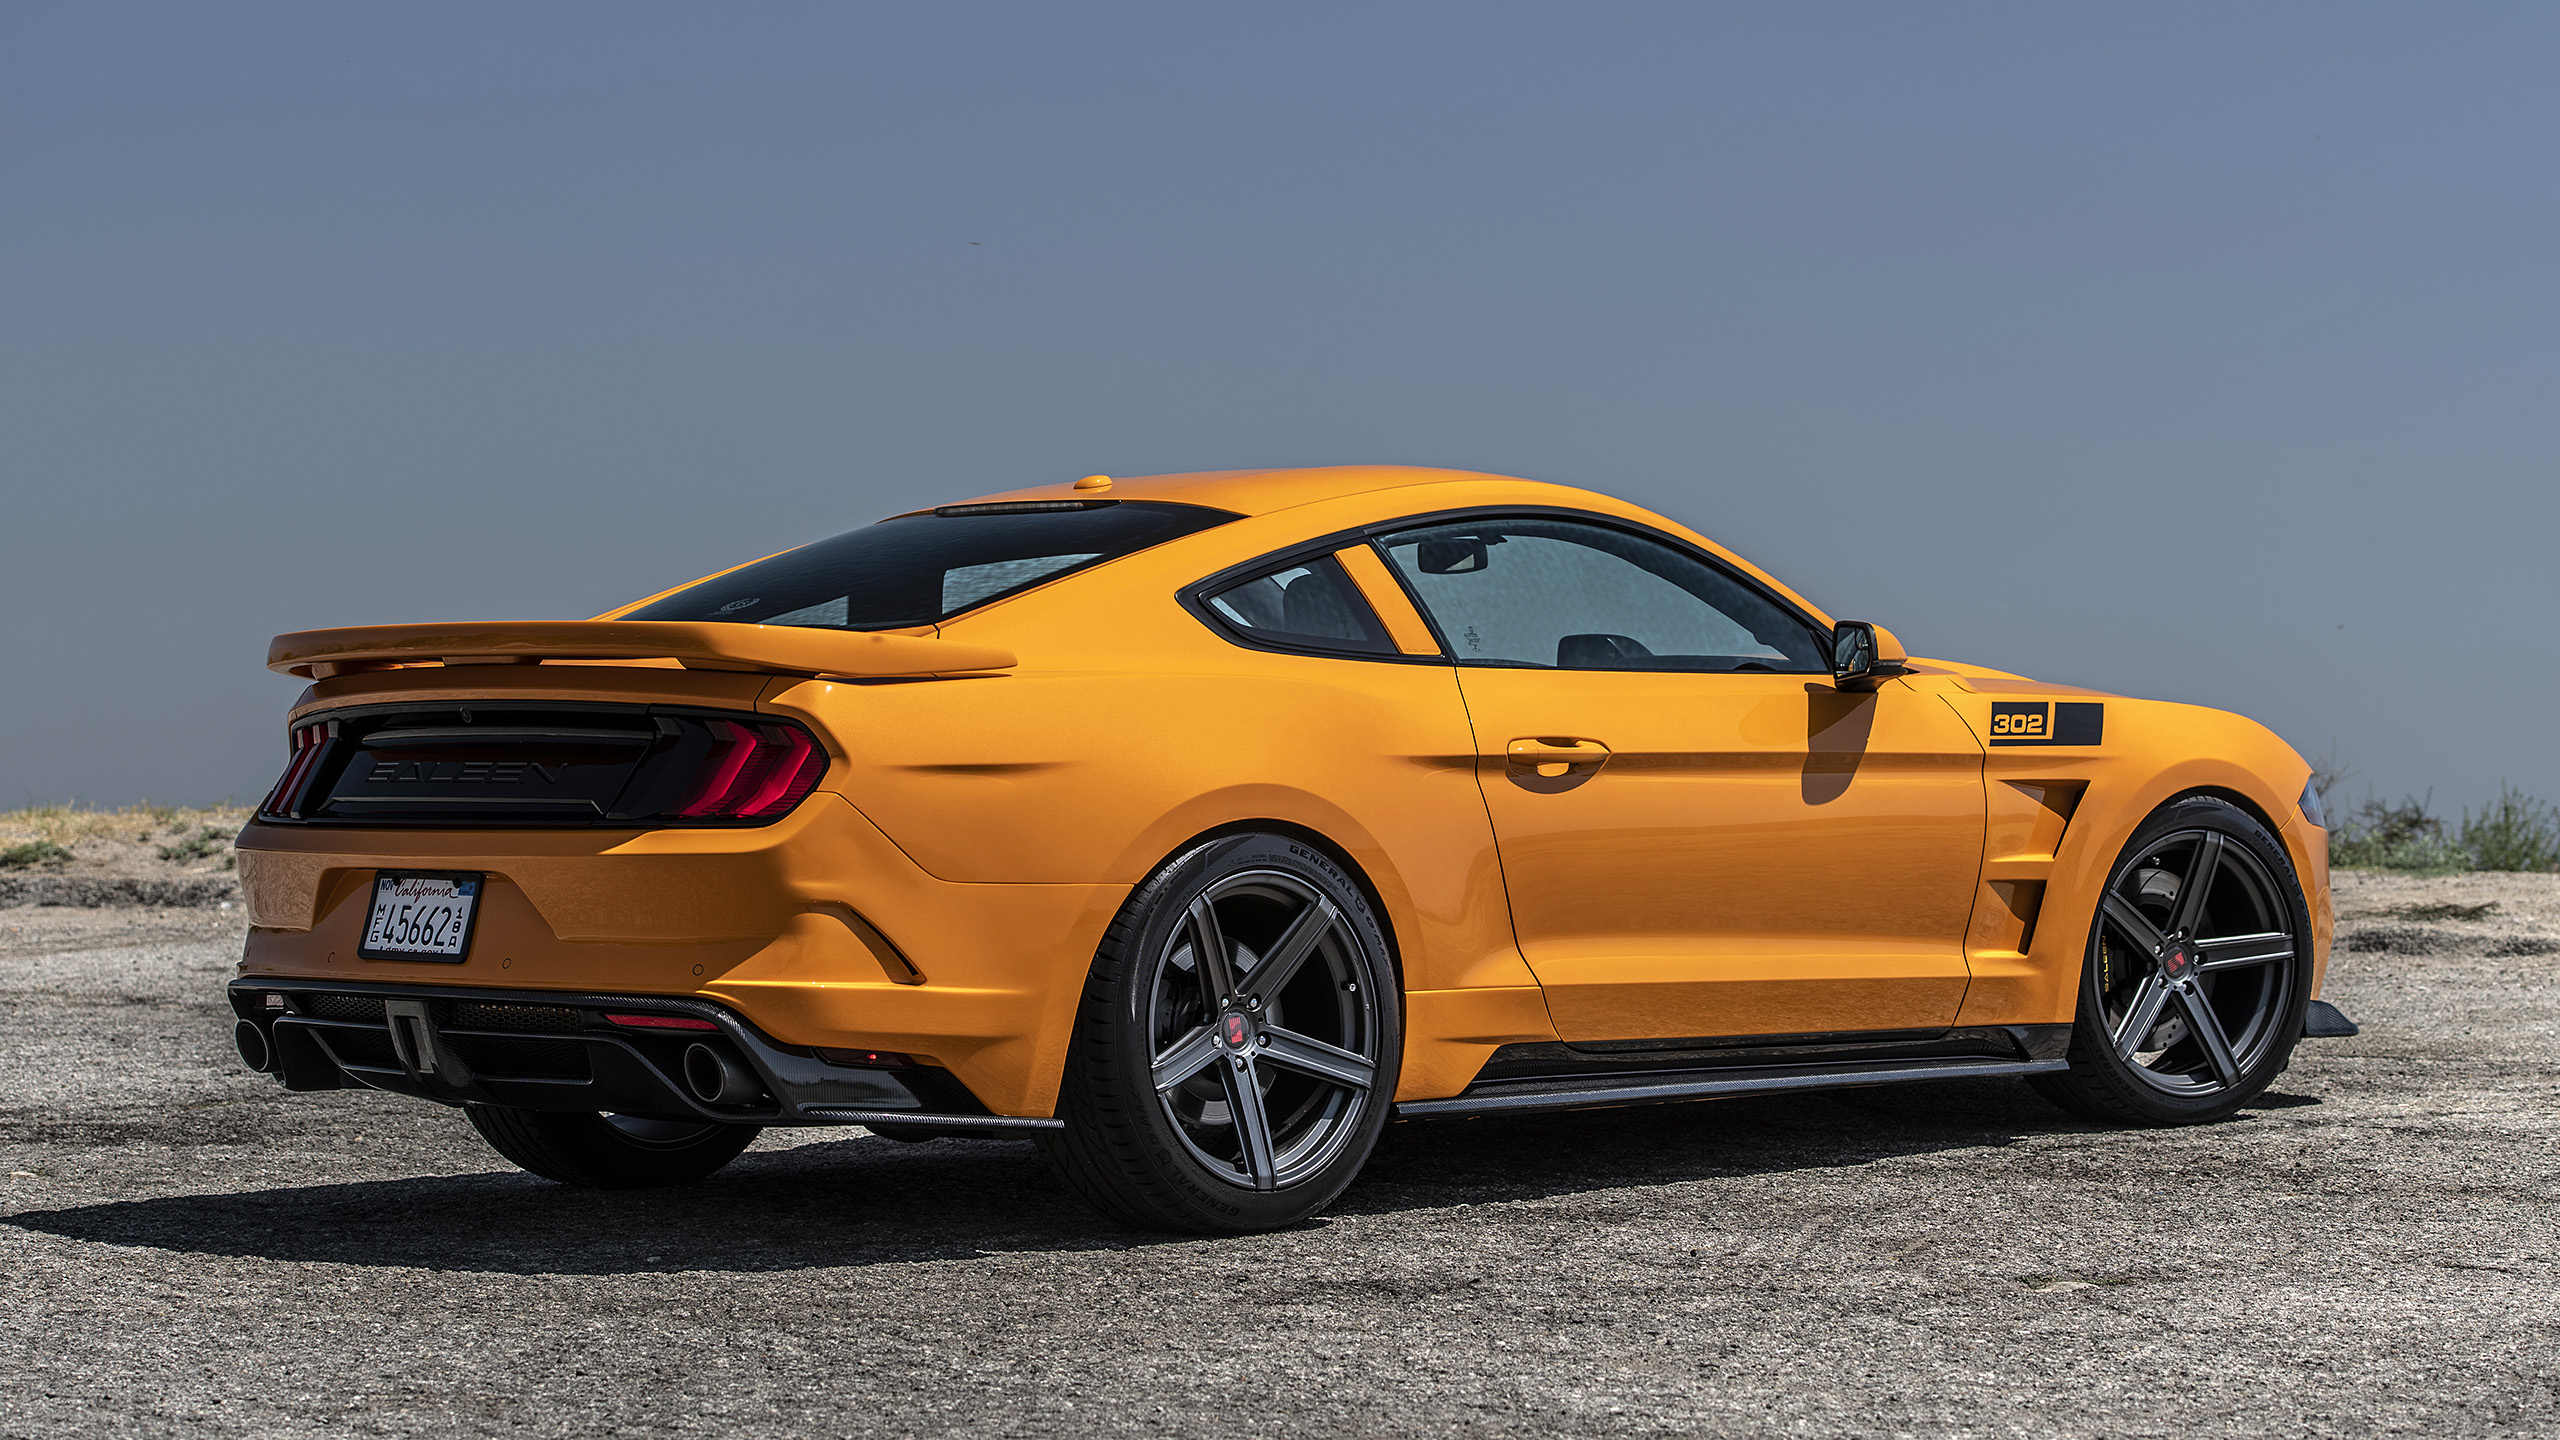 Saleen Mustang S302 Black Label First Drive Review Autoblog